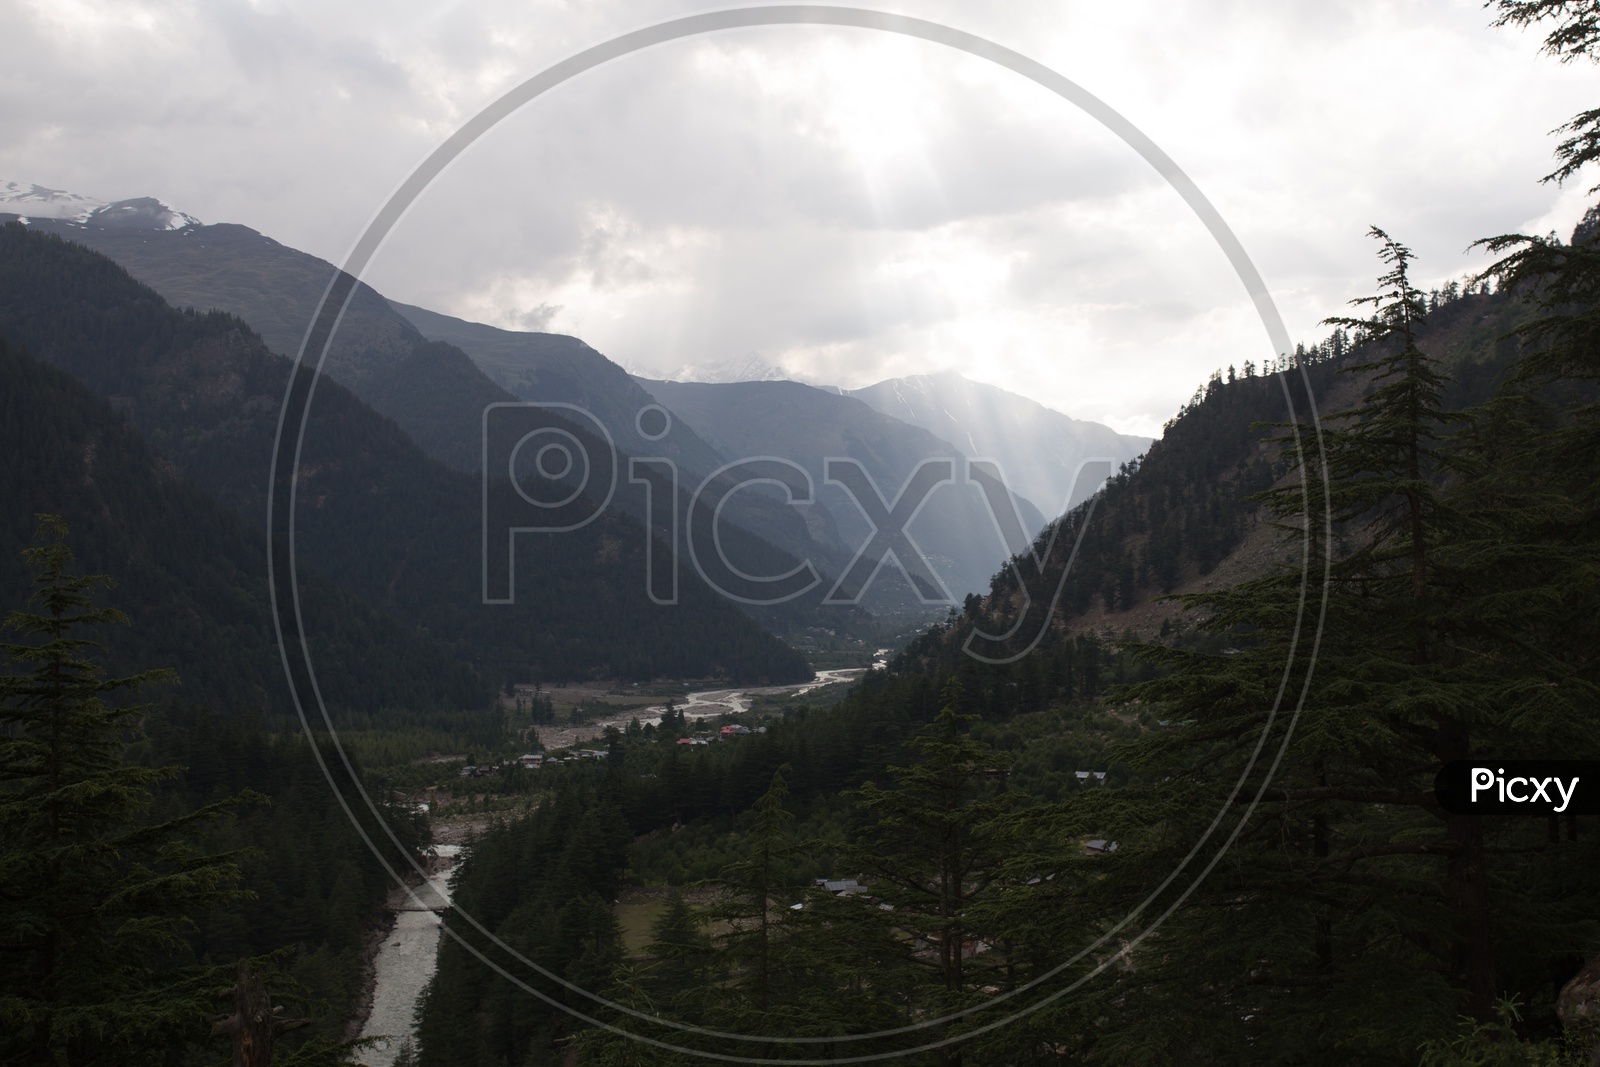 Landscape Views With Snow Capped Mountains And Cotton  fog Clouds And Green Terrain Hills on the River Valleys